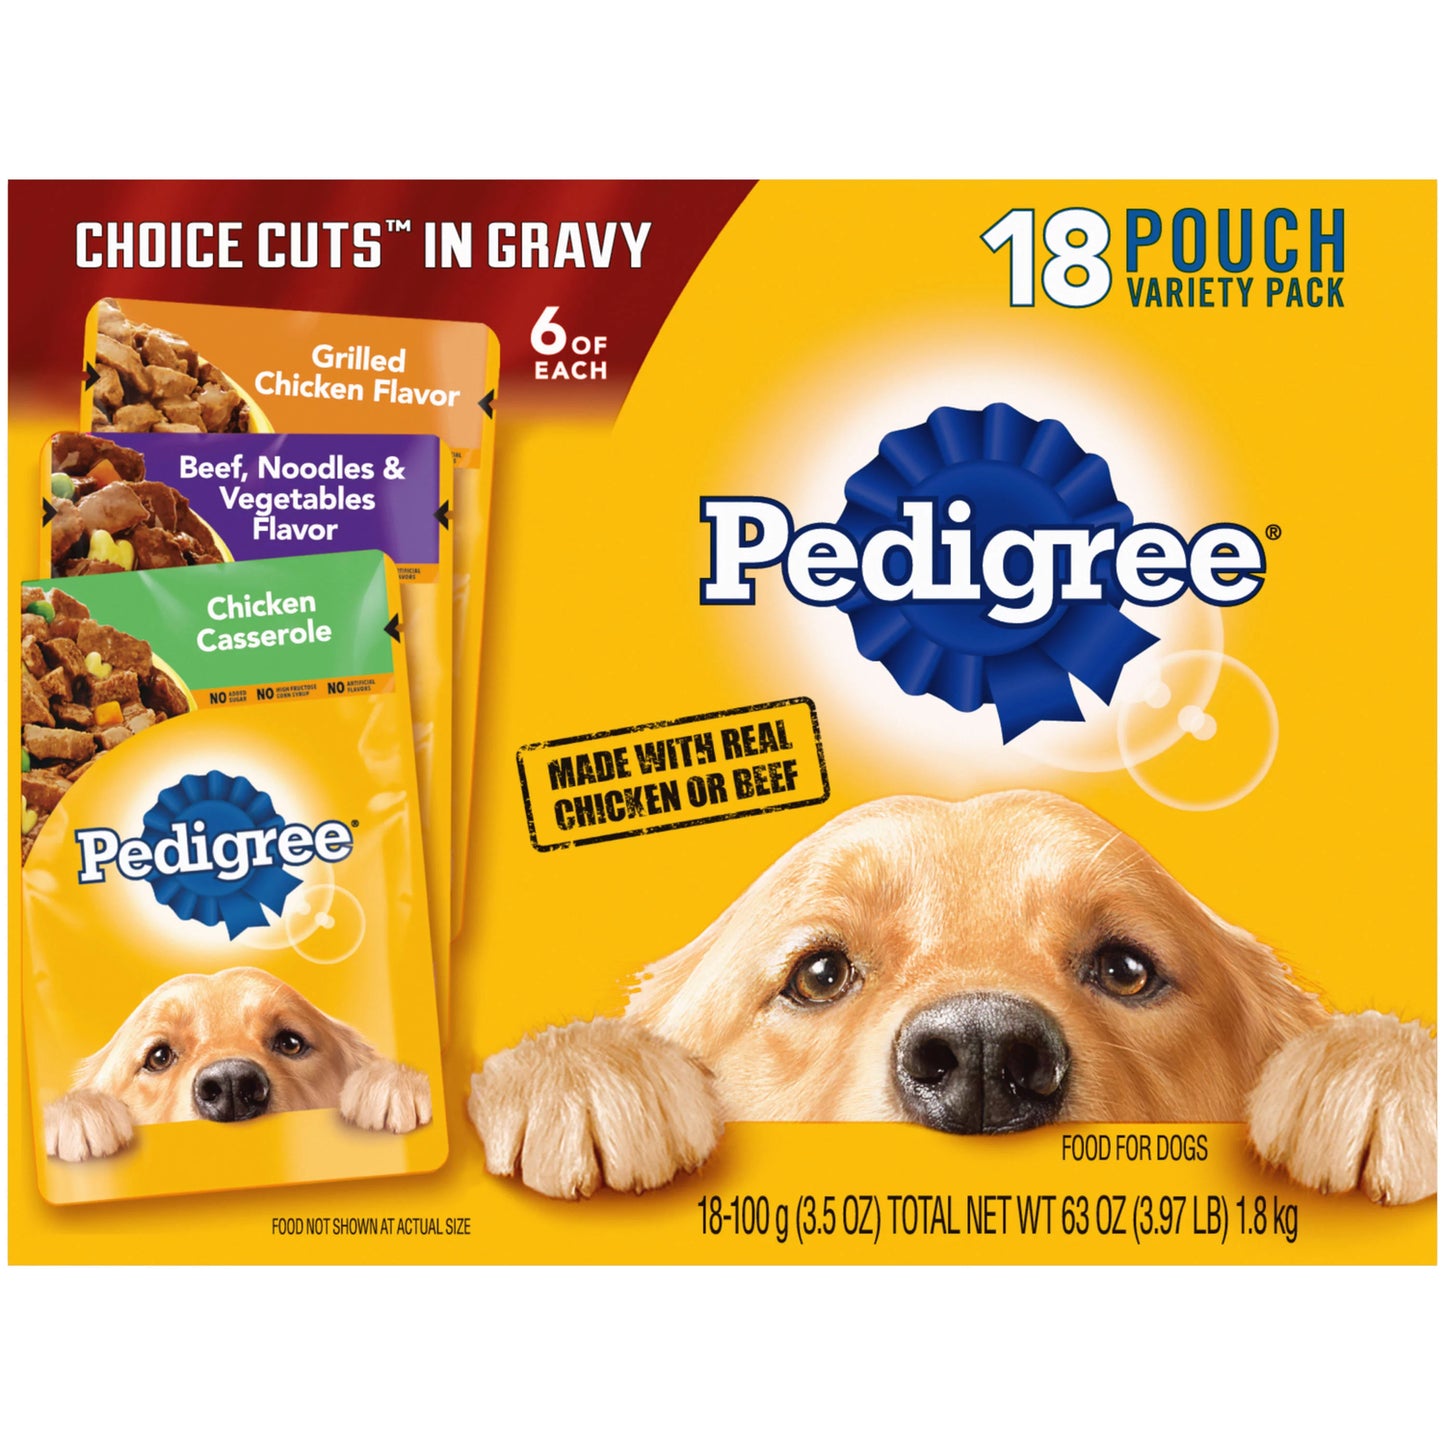 PEDIGREE CHOICE CUTS in GRAVY Adult Soft Wet Meaty Dog Food Variety Pack, (18) 3.5 Oz Pouches